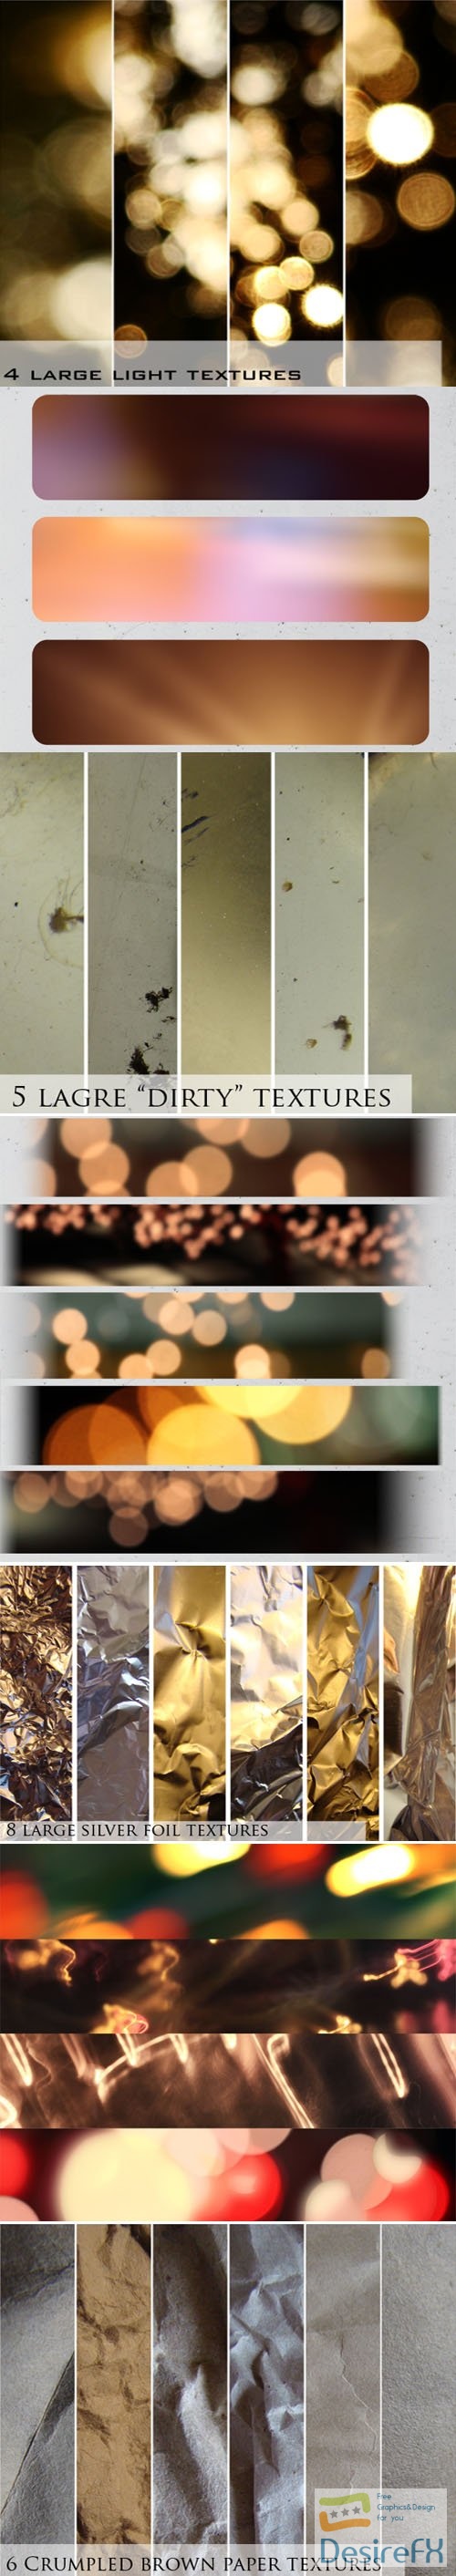 70+ Awesome Pack of Textures &amp; Backgrounds